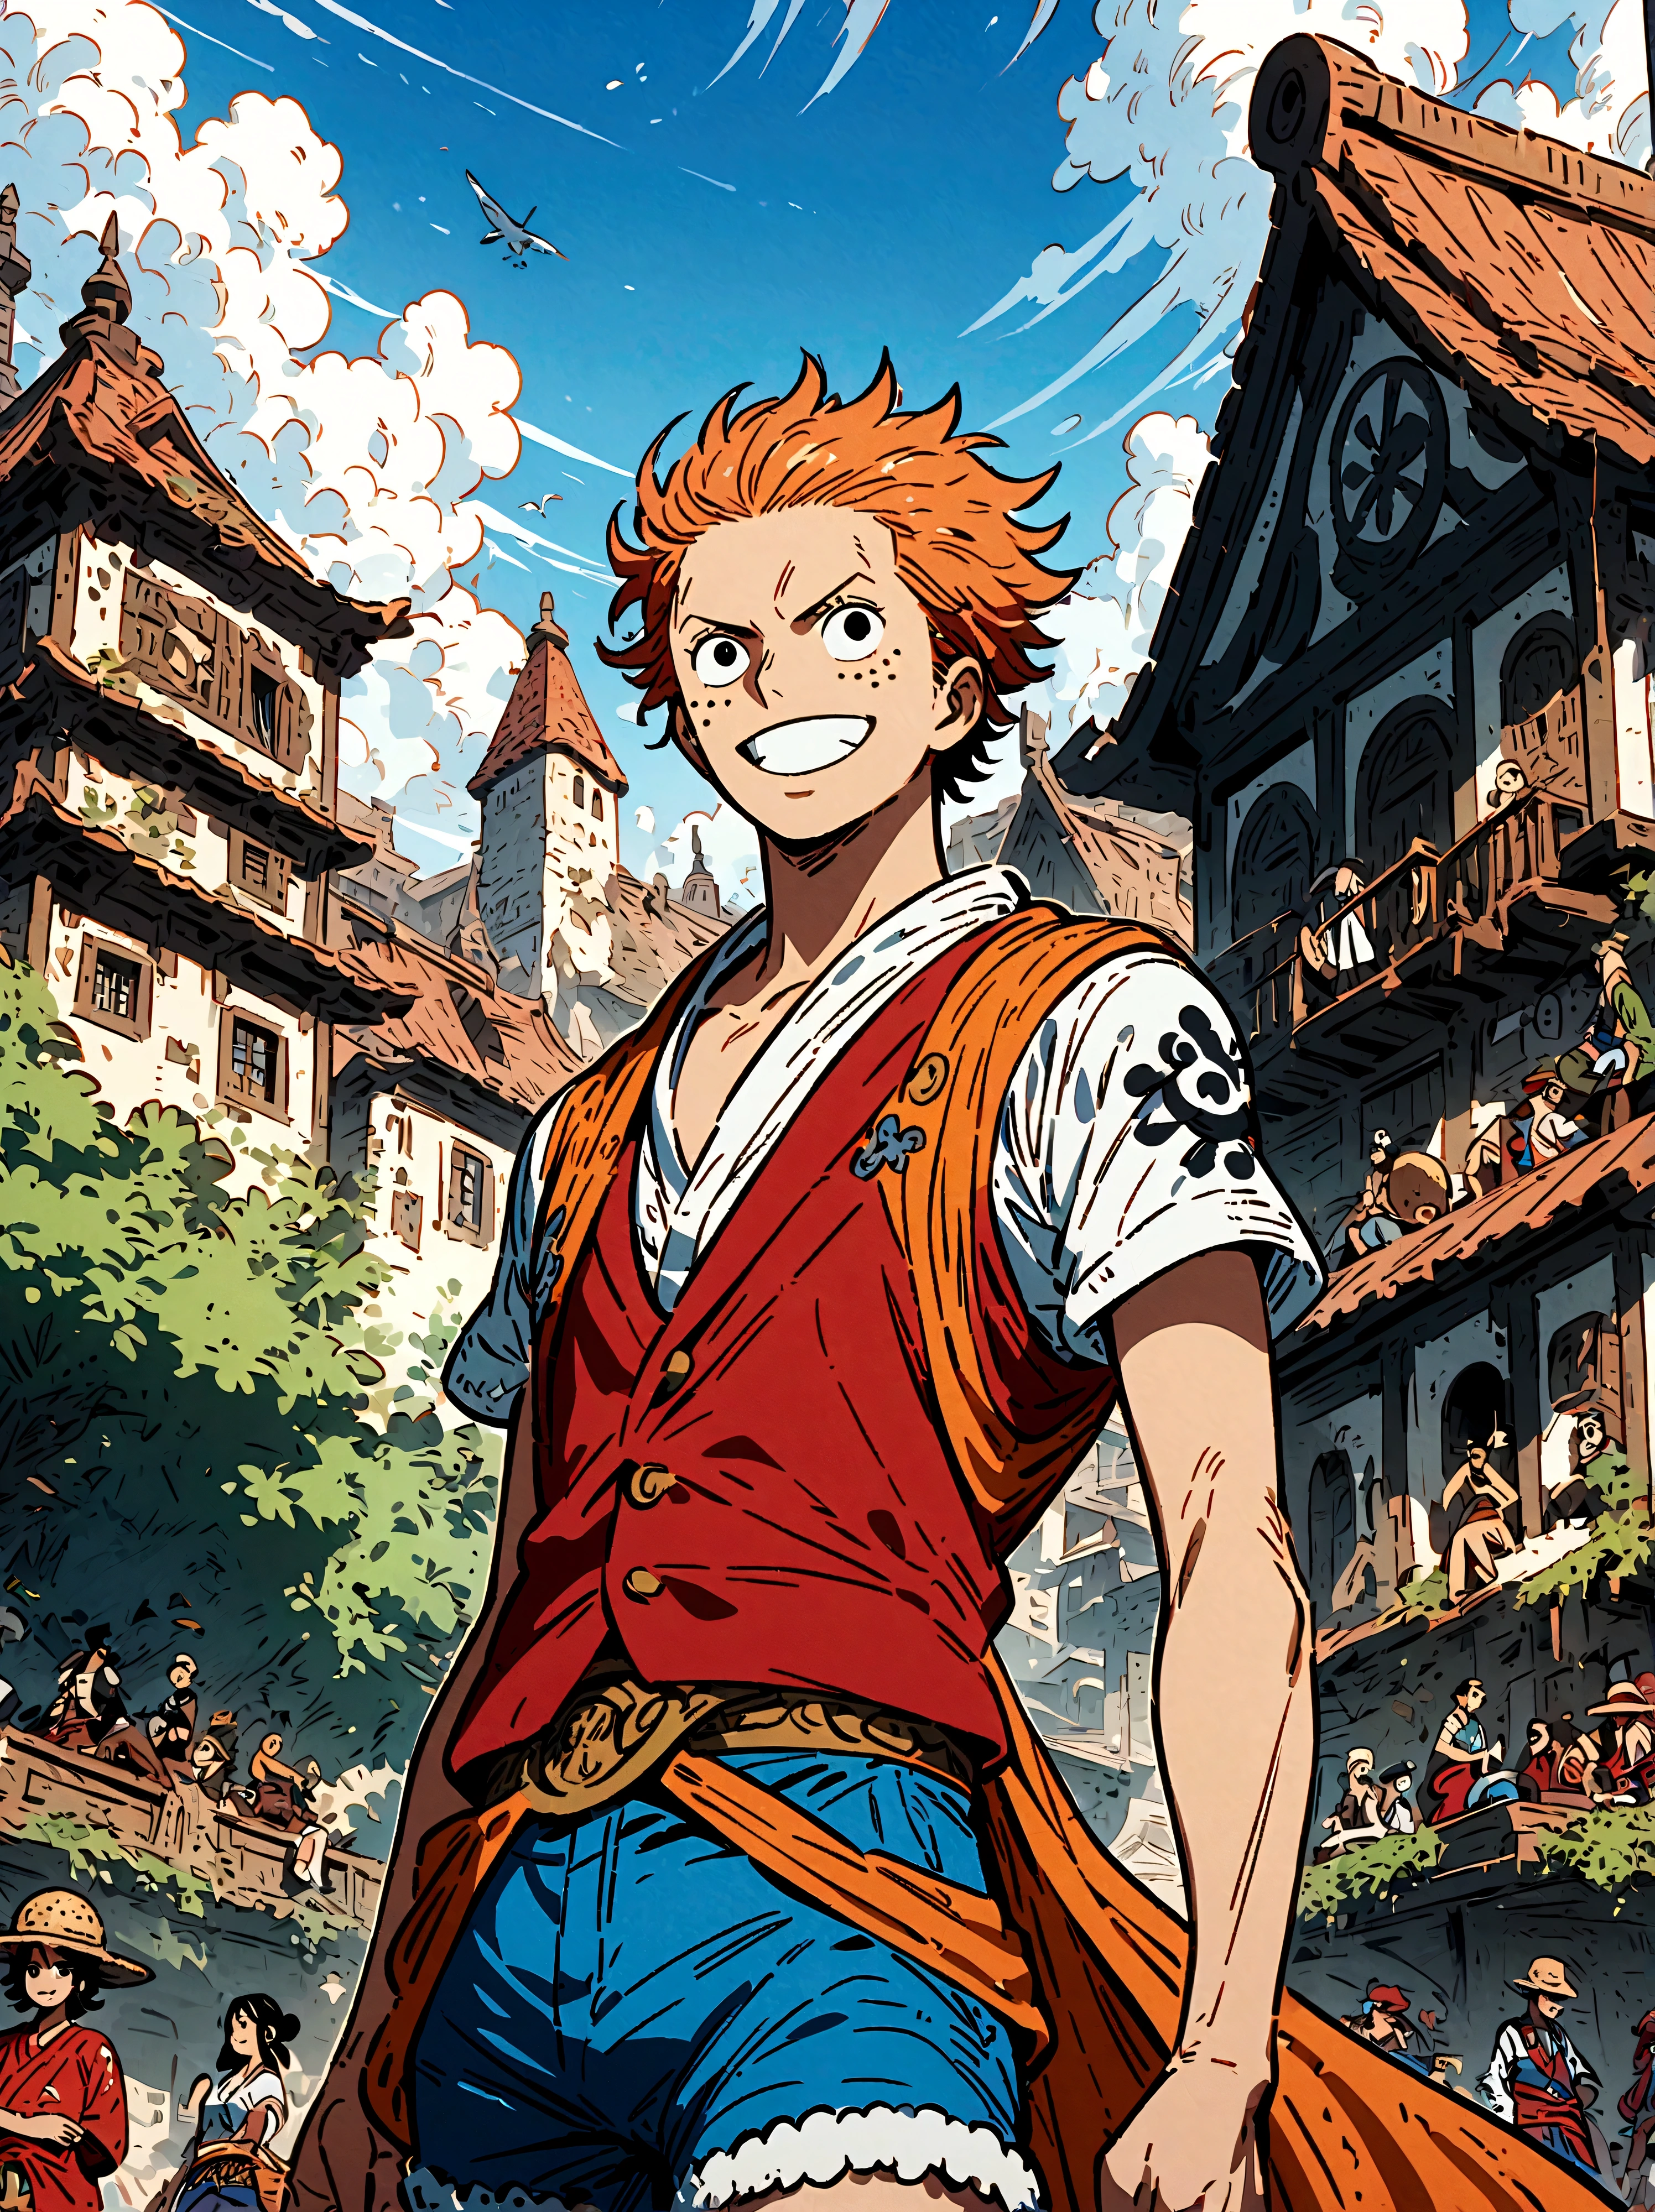 Japanese anime One Piece, Create an expansive illustration reminiscent of the popular action-adventure anime series. It should have a different group of brave explorers. Each character has its own uniqueness. One is tall and thin、A man with black spikes, Wearing a red vest, Blue shorts, and a straw hat. His cheerful personality and love of adventure are evident in his bright smile. Another character is a man with slicked back hair, Shoulder-length light moss green hair, Dressed in exquisite burgundy clothing, His demeanor reflects his dignity and maturity.. The third character is a beautiful and elegant young woman, She has orange hair，Wearing a simple vest and a mini skirt. The stunning blue sea covers the entire background, It adds a dangerous and exciting atmosphere to the whole scene.